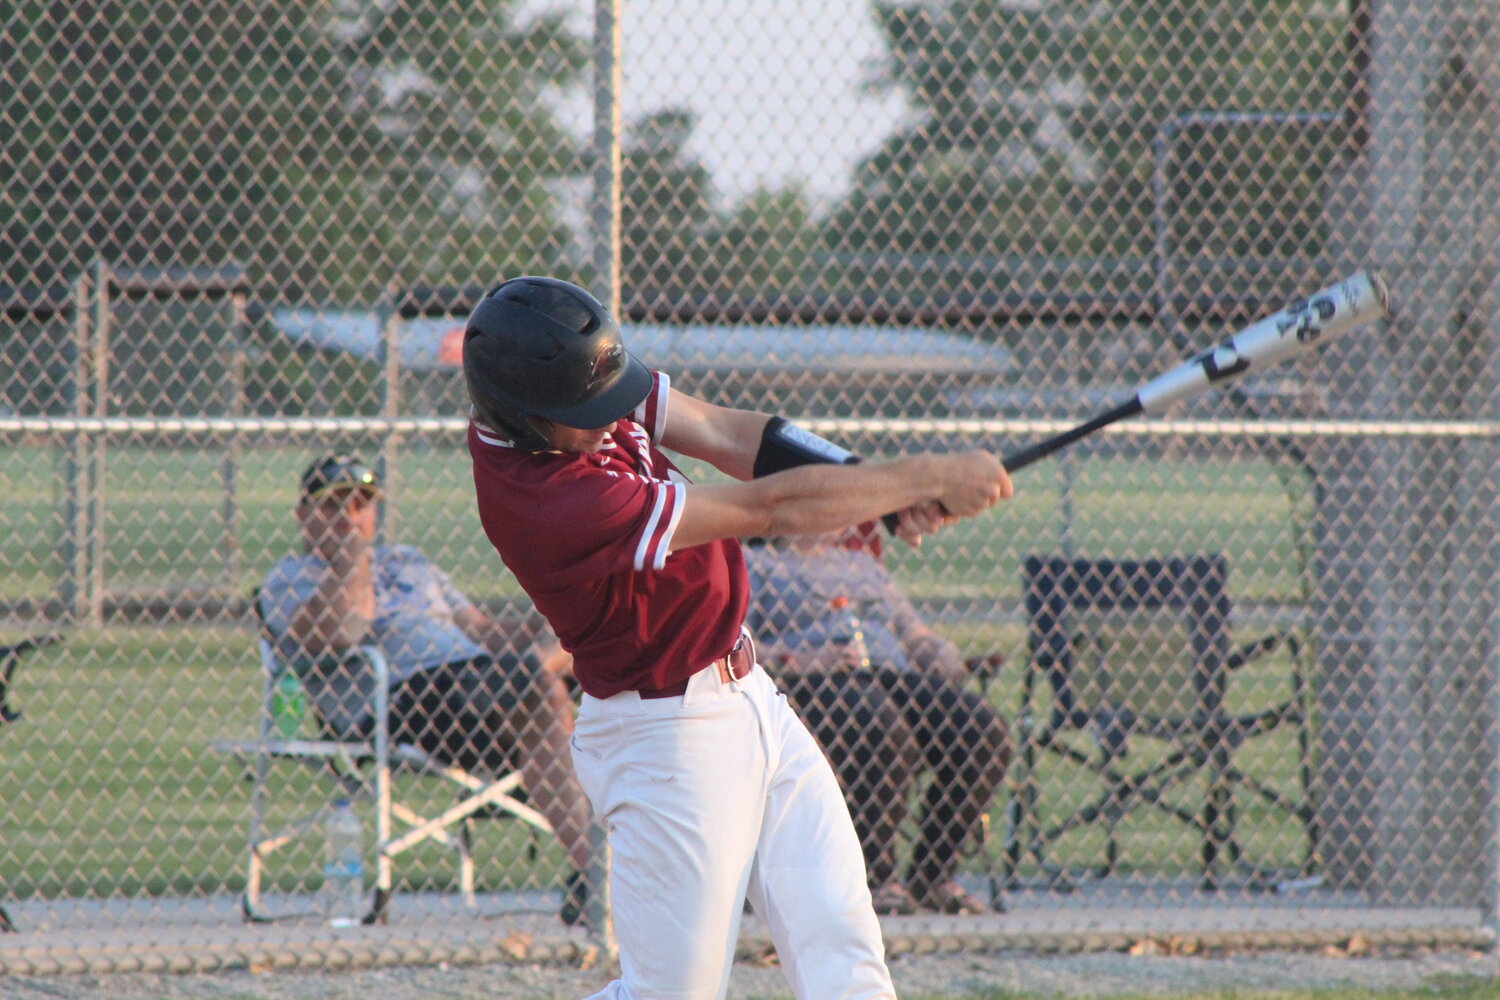 Hillcrest senior Luke Schrock leads the Southeast Iowa Super Conference in hitting and is No. 3 in the state.